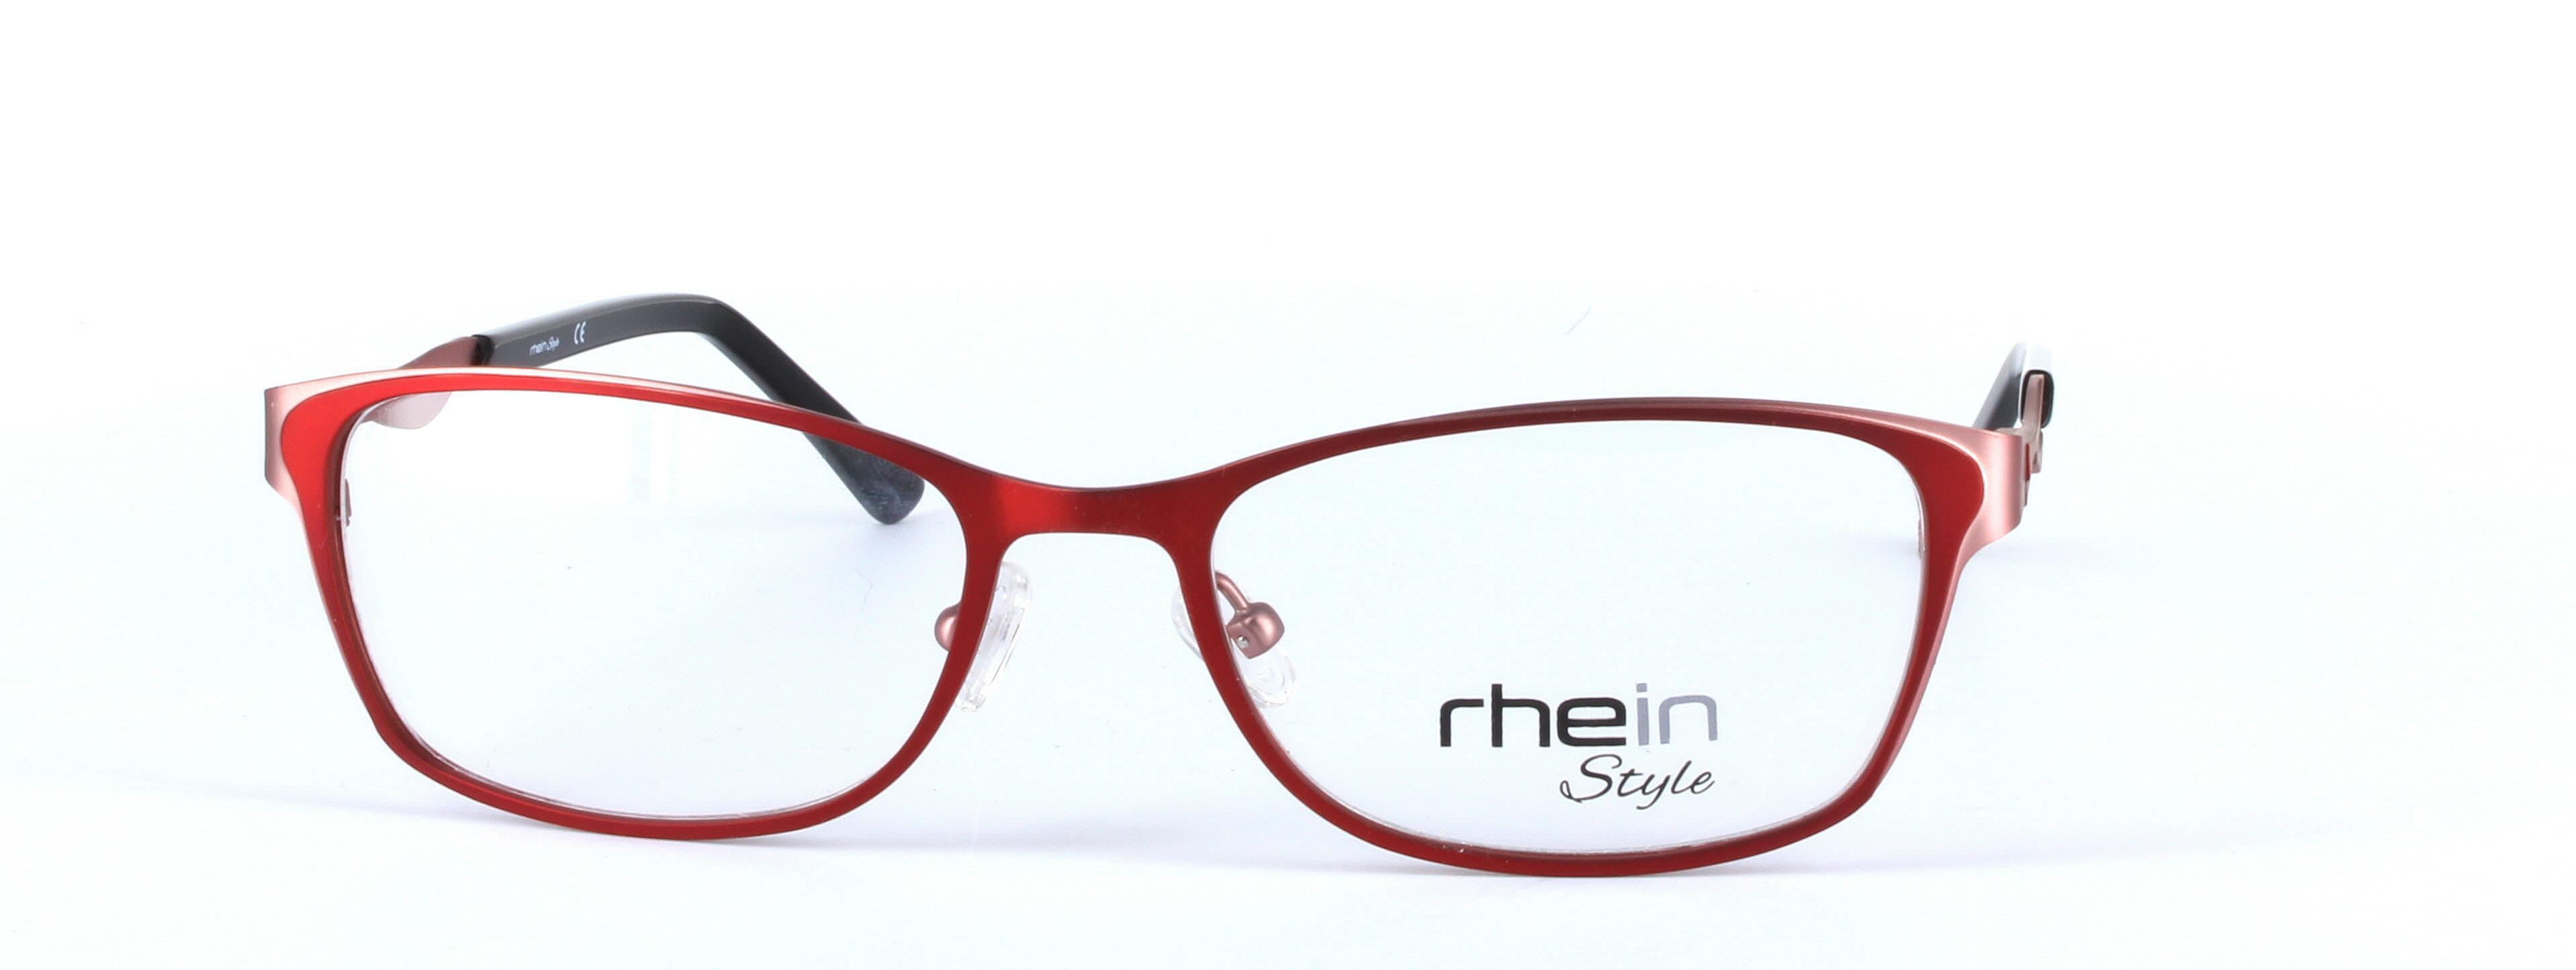 Darcy Red Full Rim Oval Metal Glasses - Image View 5